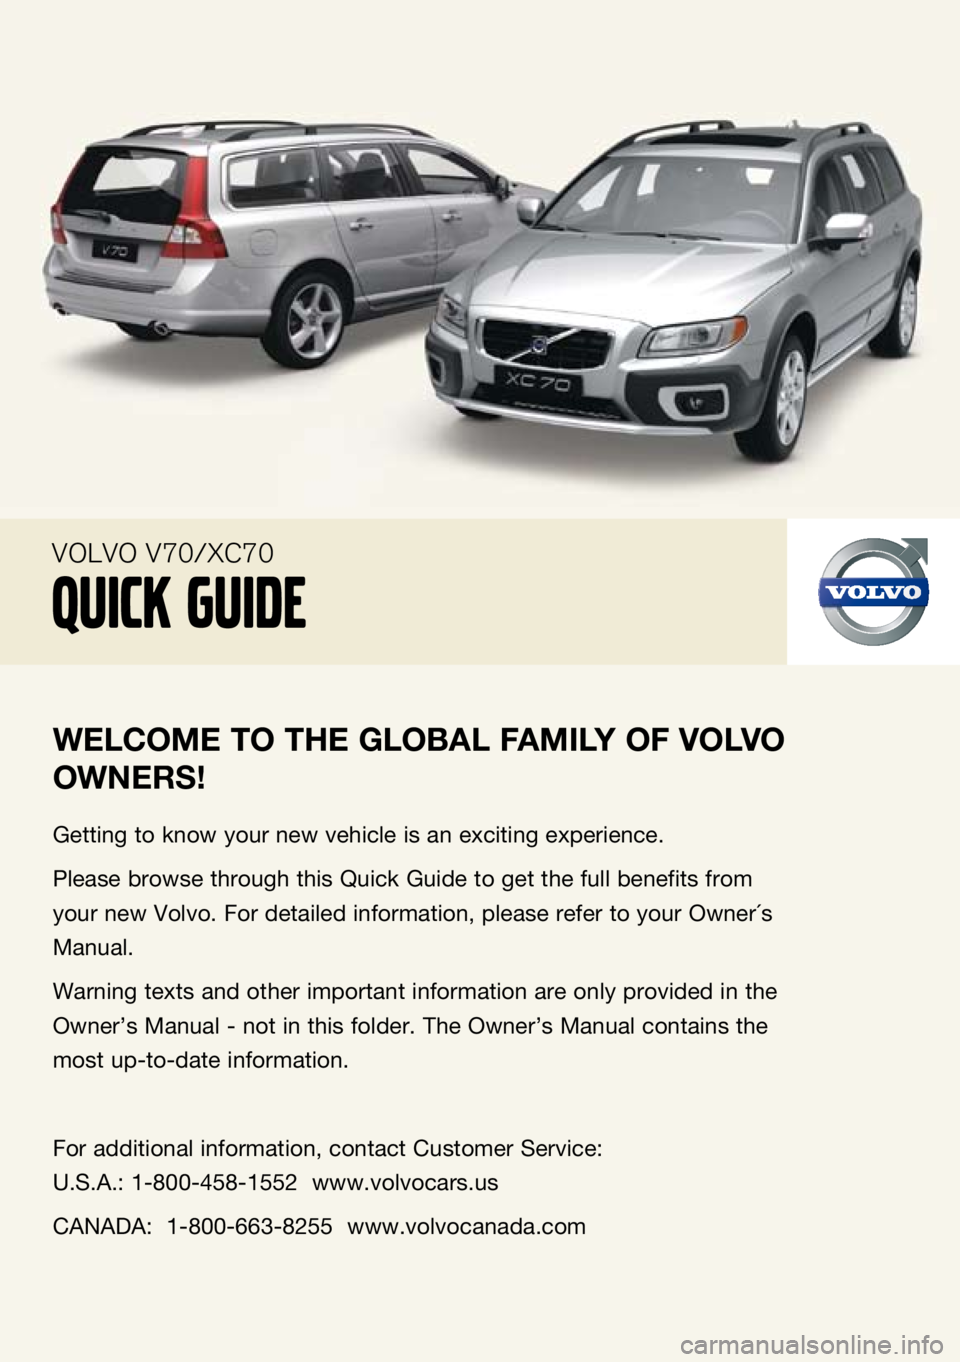 VOLVO V70 2009  Quick Guide 
welcome to the  gloBAl fA mily  of volvo 
owners !
Getting to know your new vehicle is an exciting experience.
Please browse through this Quick Guide to get the full benefits from 
your new Volvo. Fo